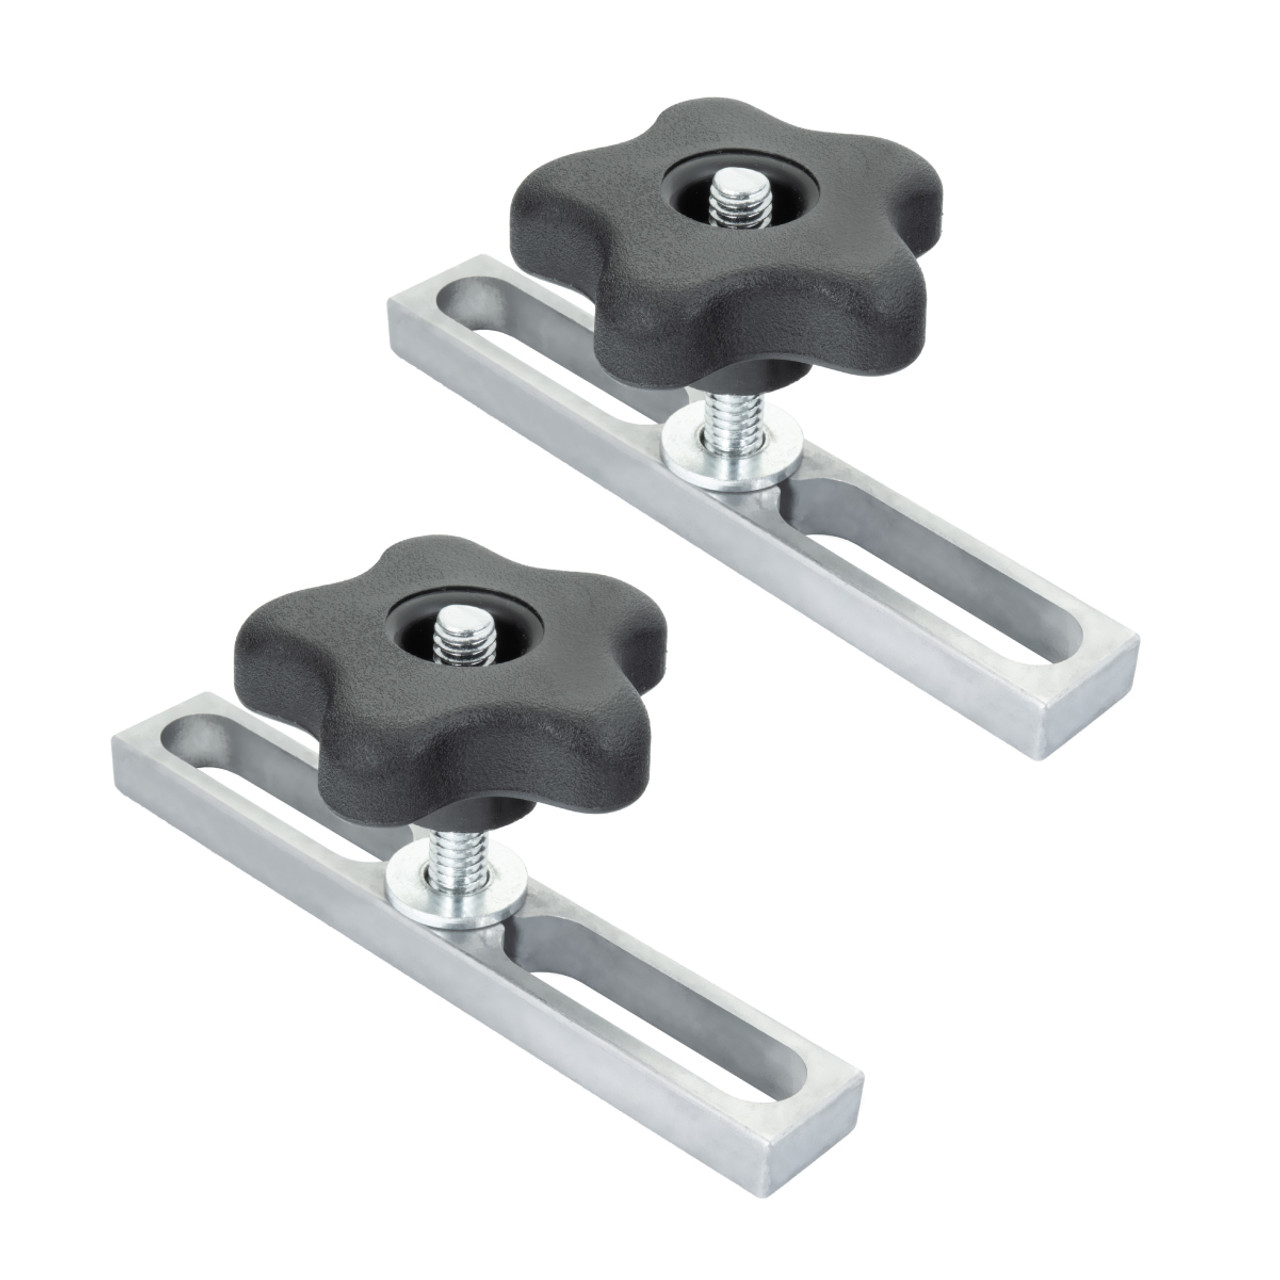 T Track Stop - Aluminum T Track Corner Stop - T Track Accessories Fits Any  Track - Ideal Use for T-Track Table, CNC Machines and jigs 